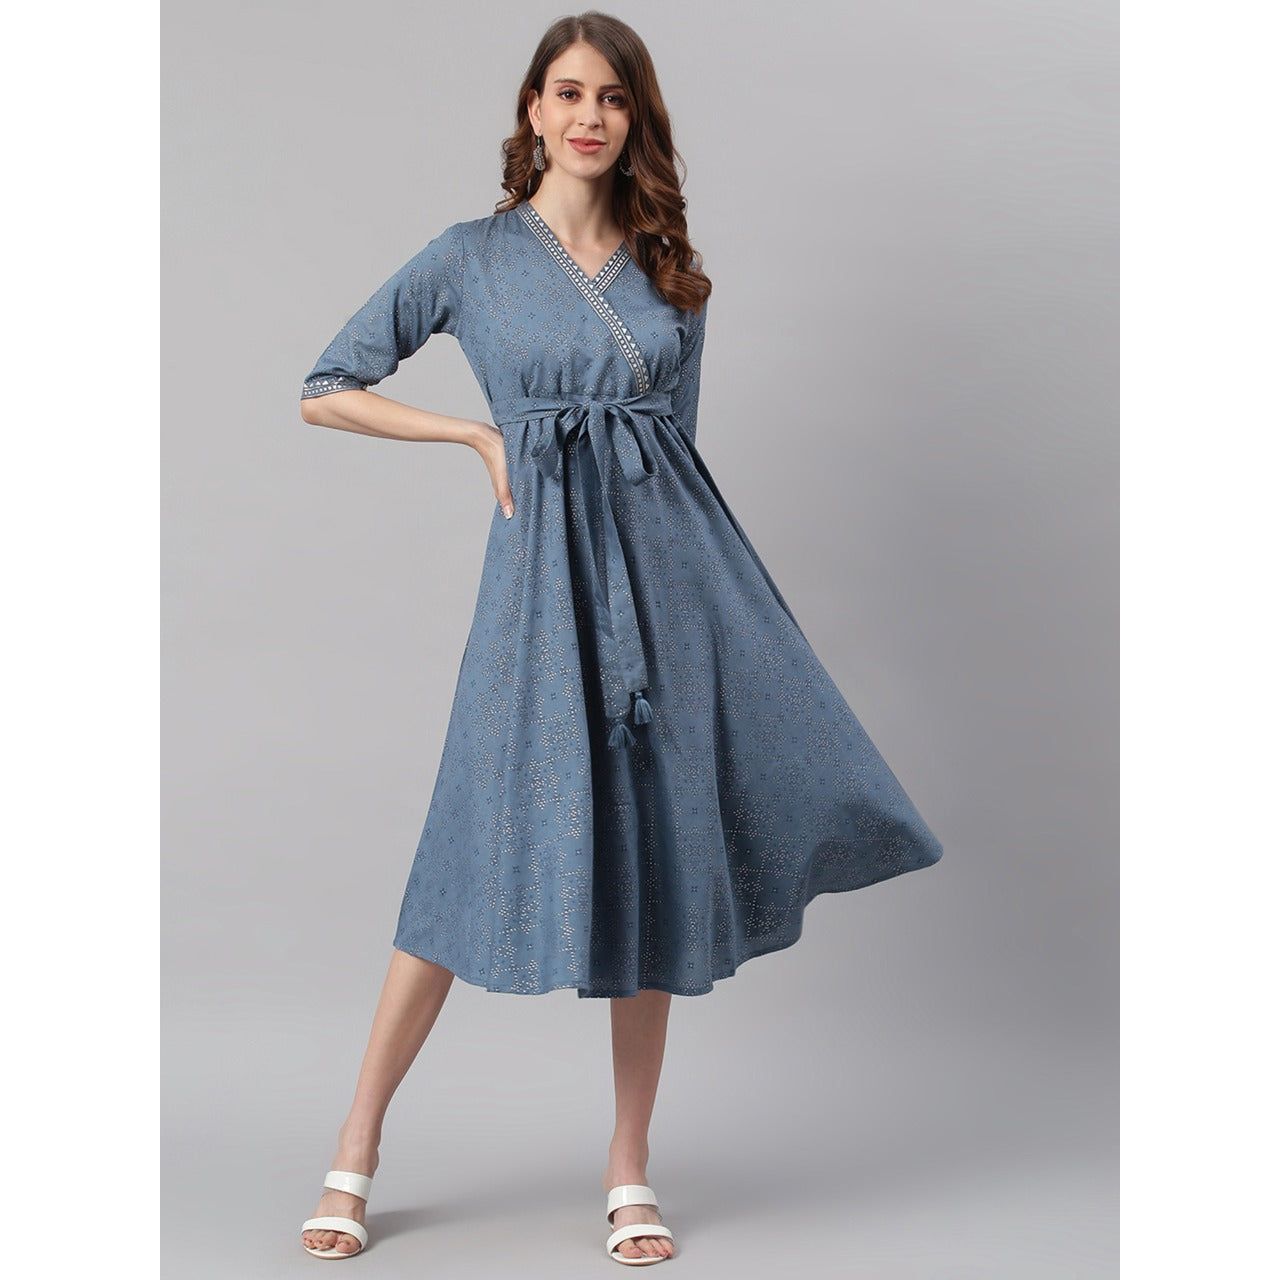 Fusion Wear Cotton Dress / Indo Western Wear Outfit for Women